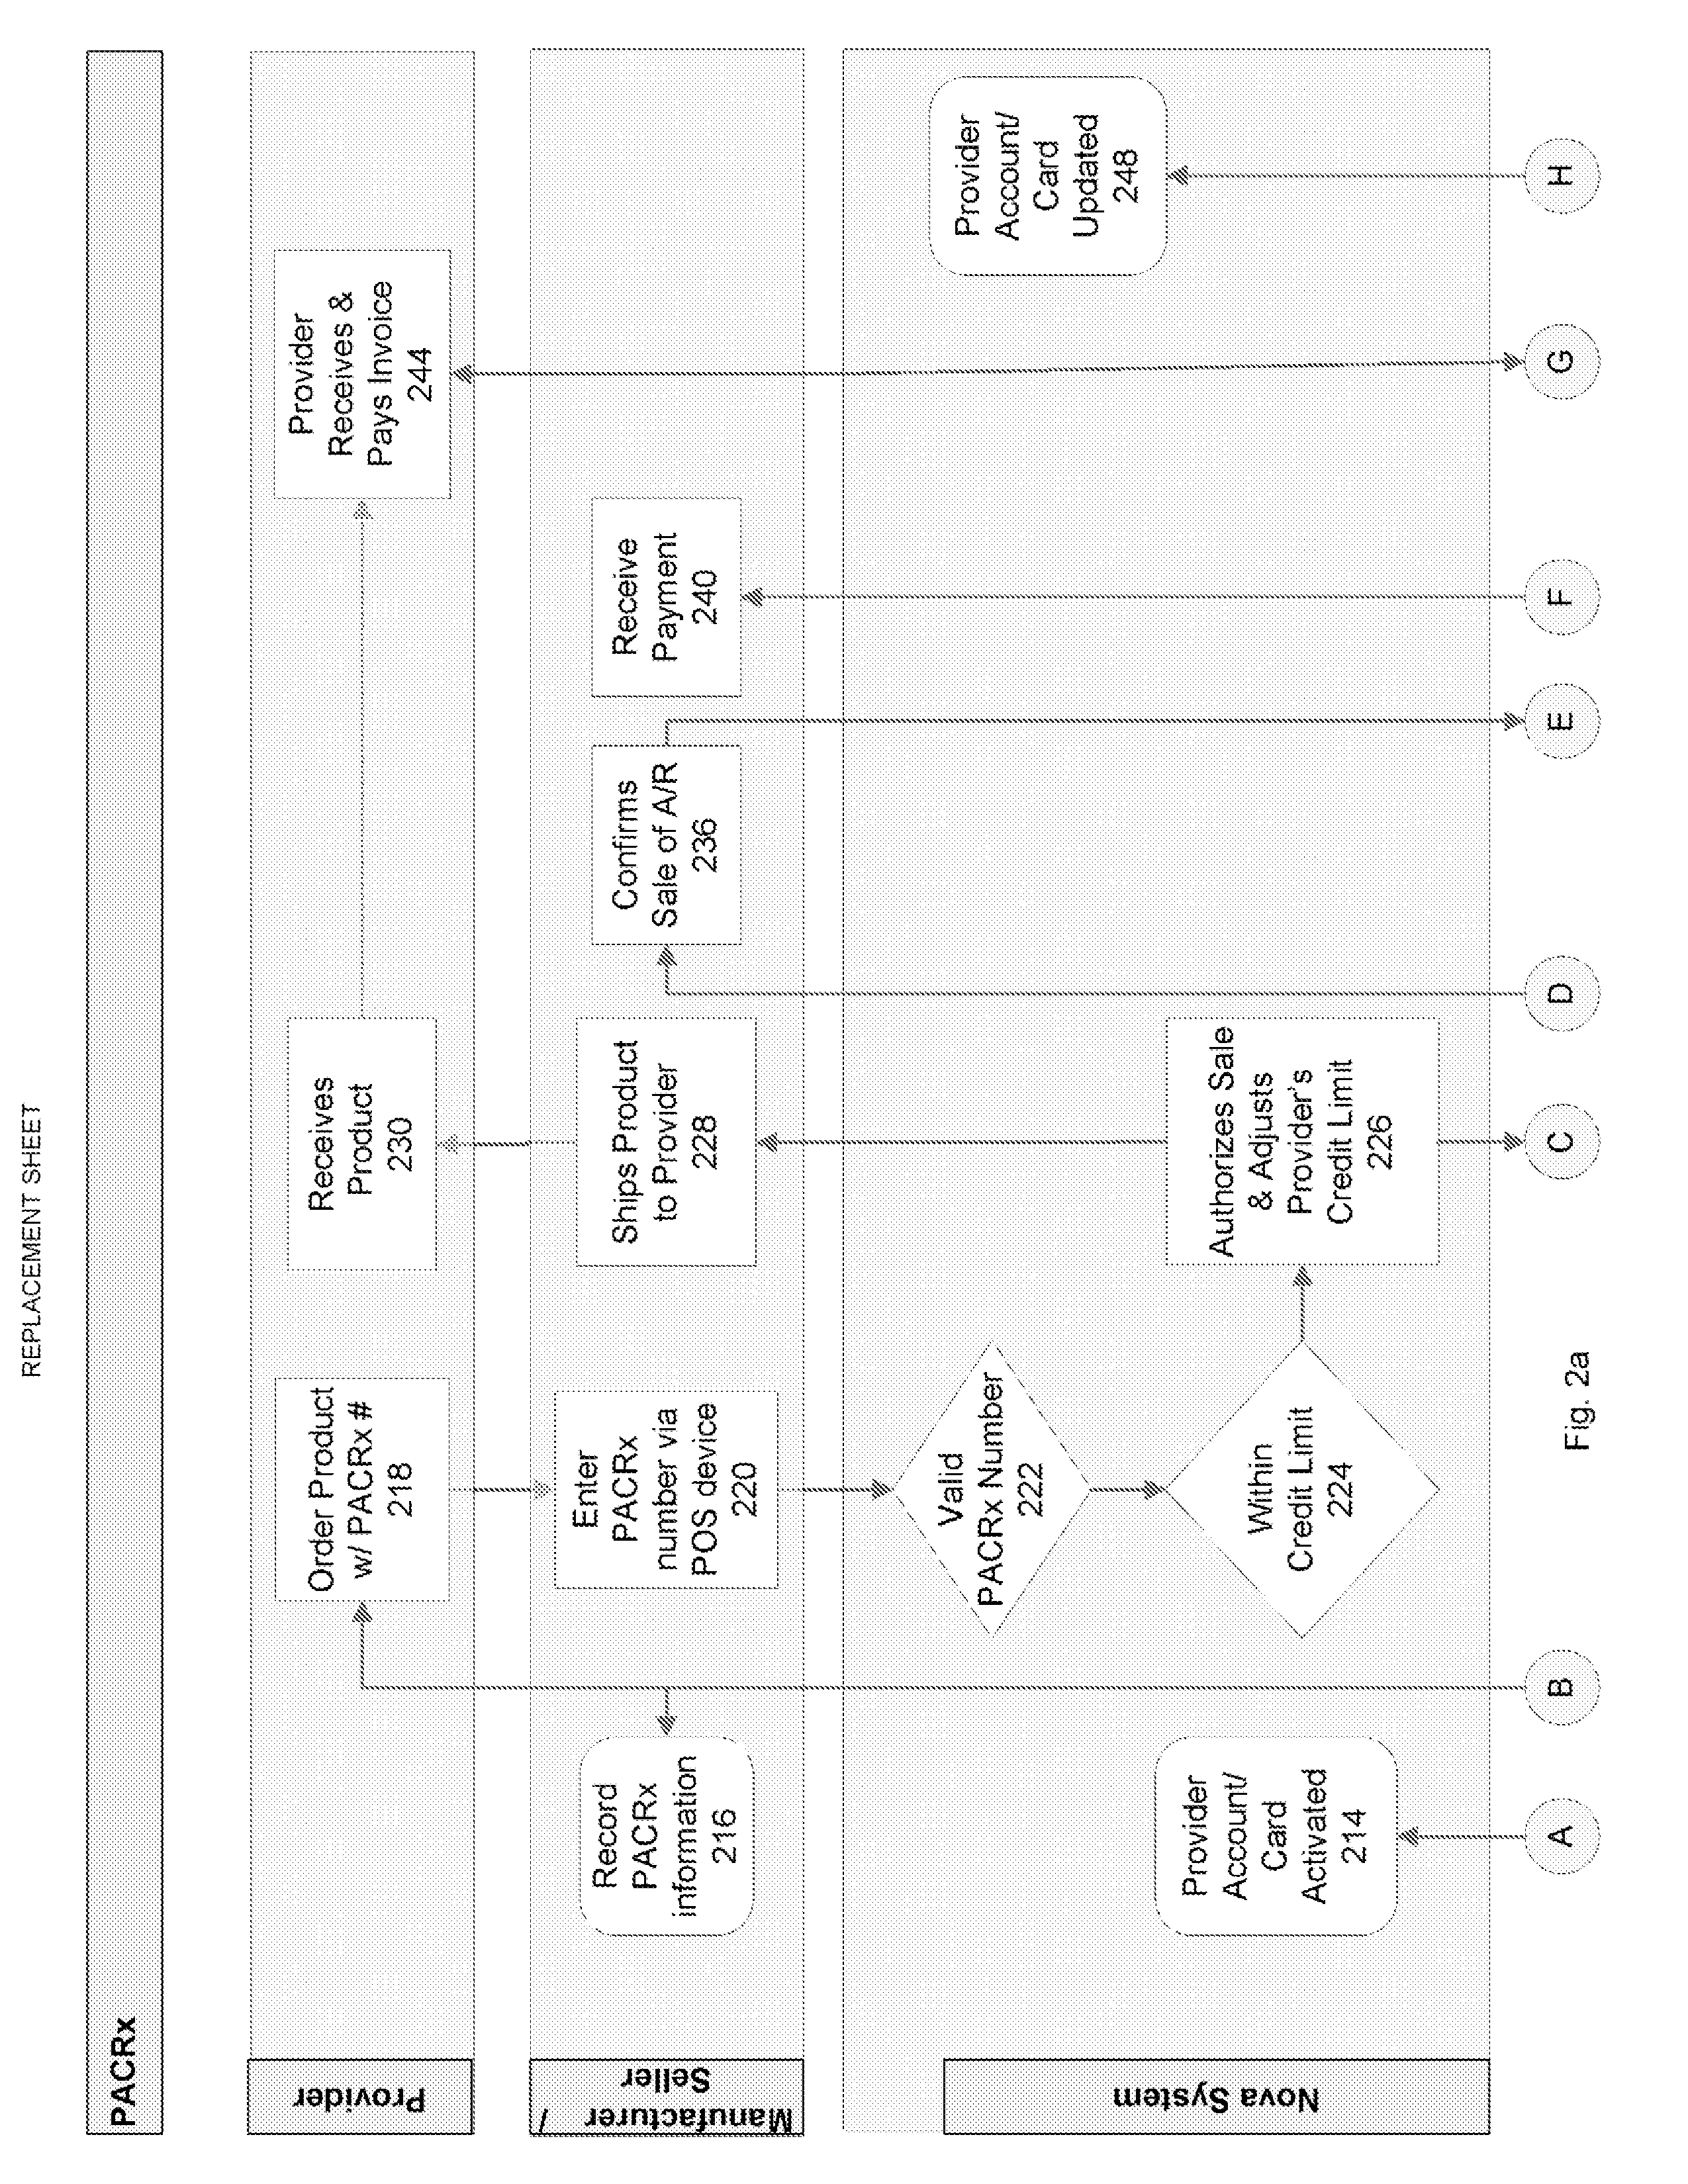 Health care payment system and method